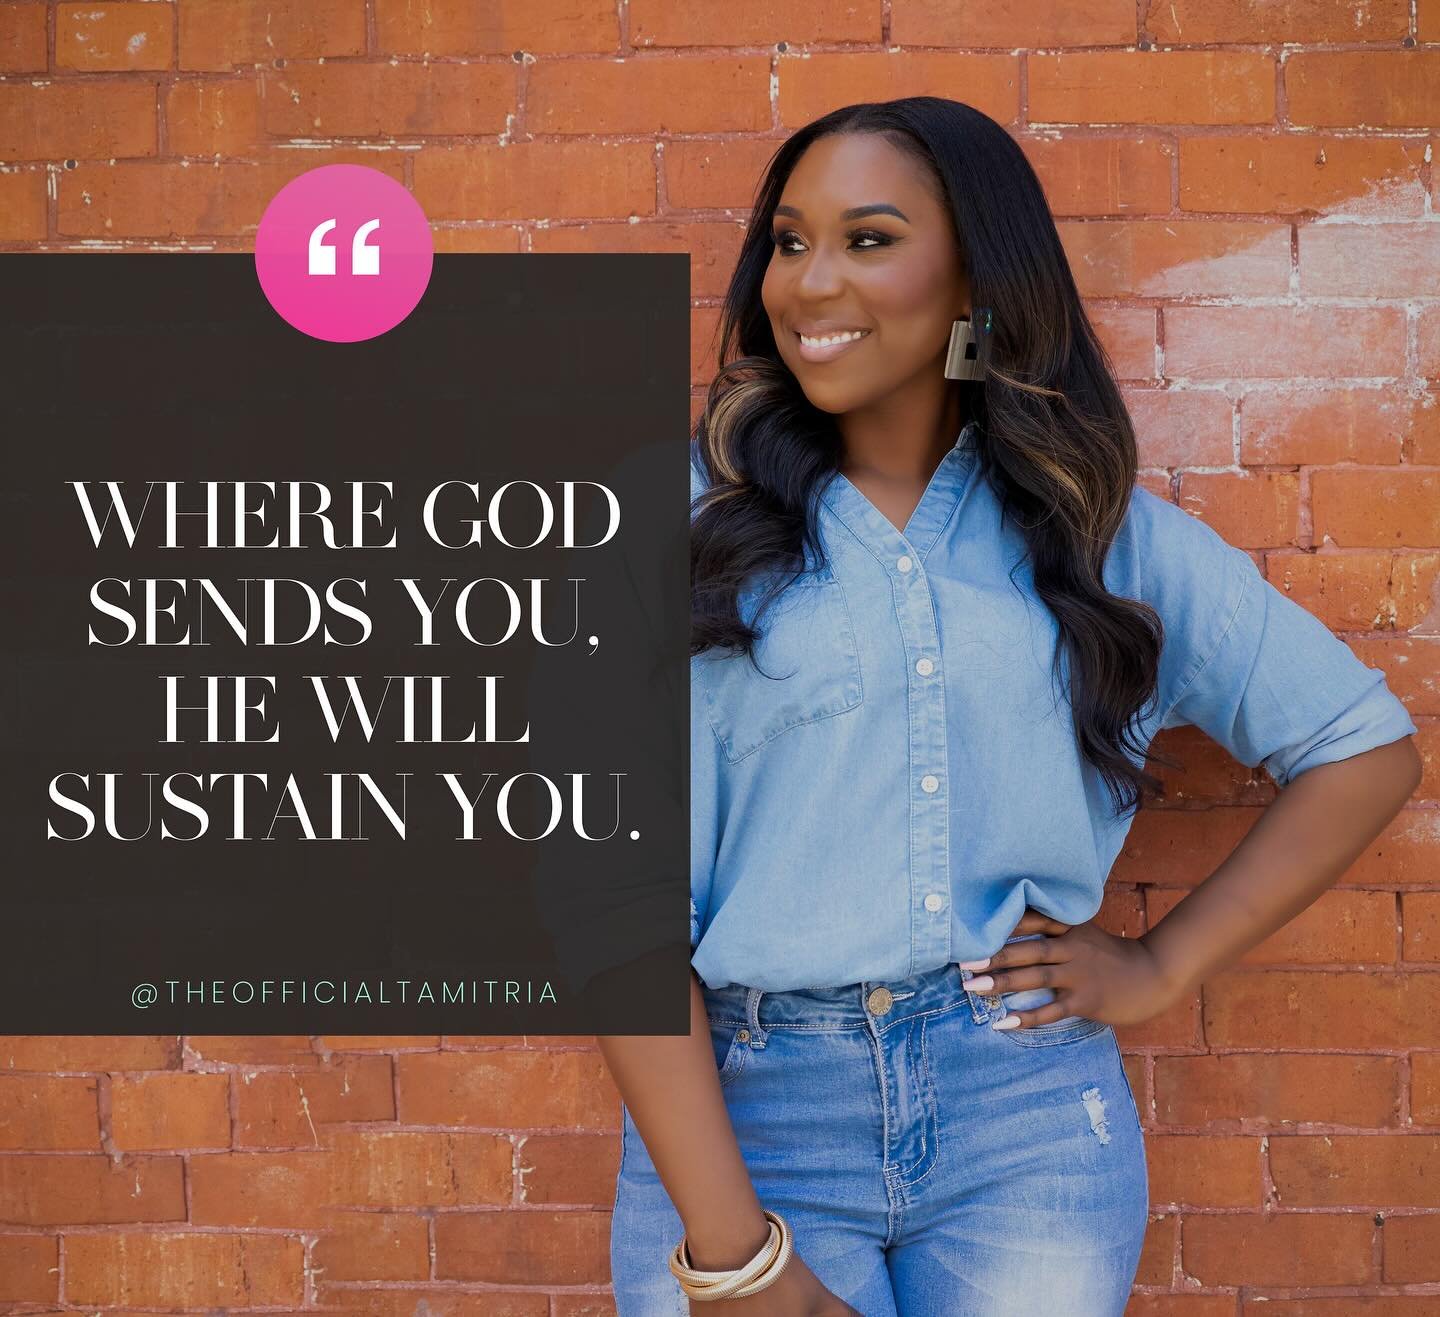 Wherever God sends you, he will sustain, keep and guide you! You are GRACED for the calling! @theofficialtamitria